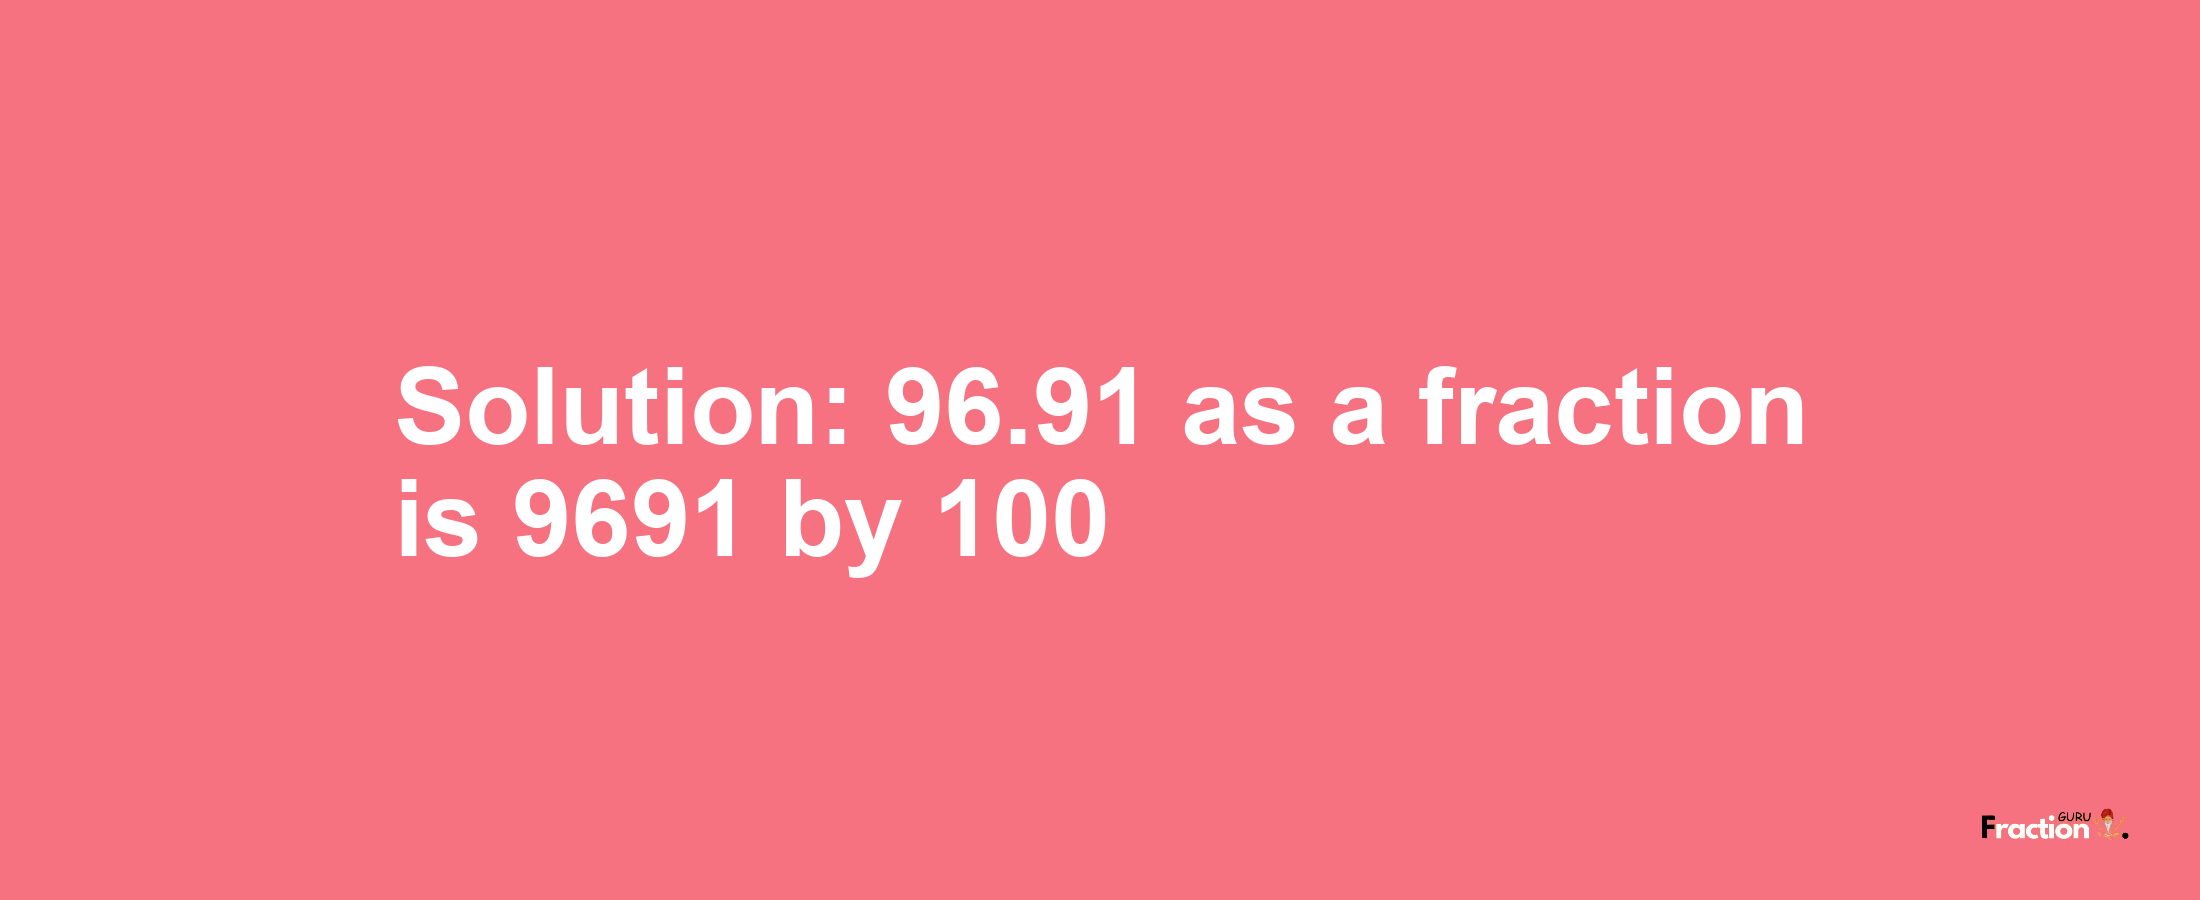 Solution:96.91 as a fraction is 9691/100